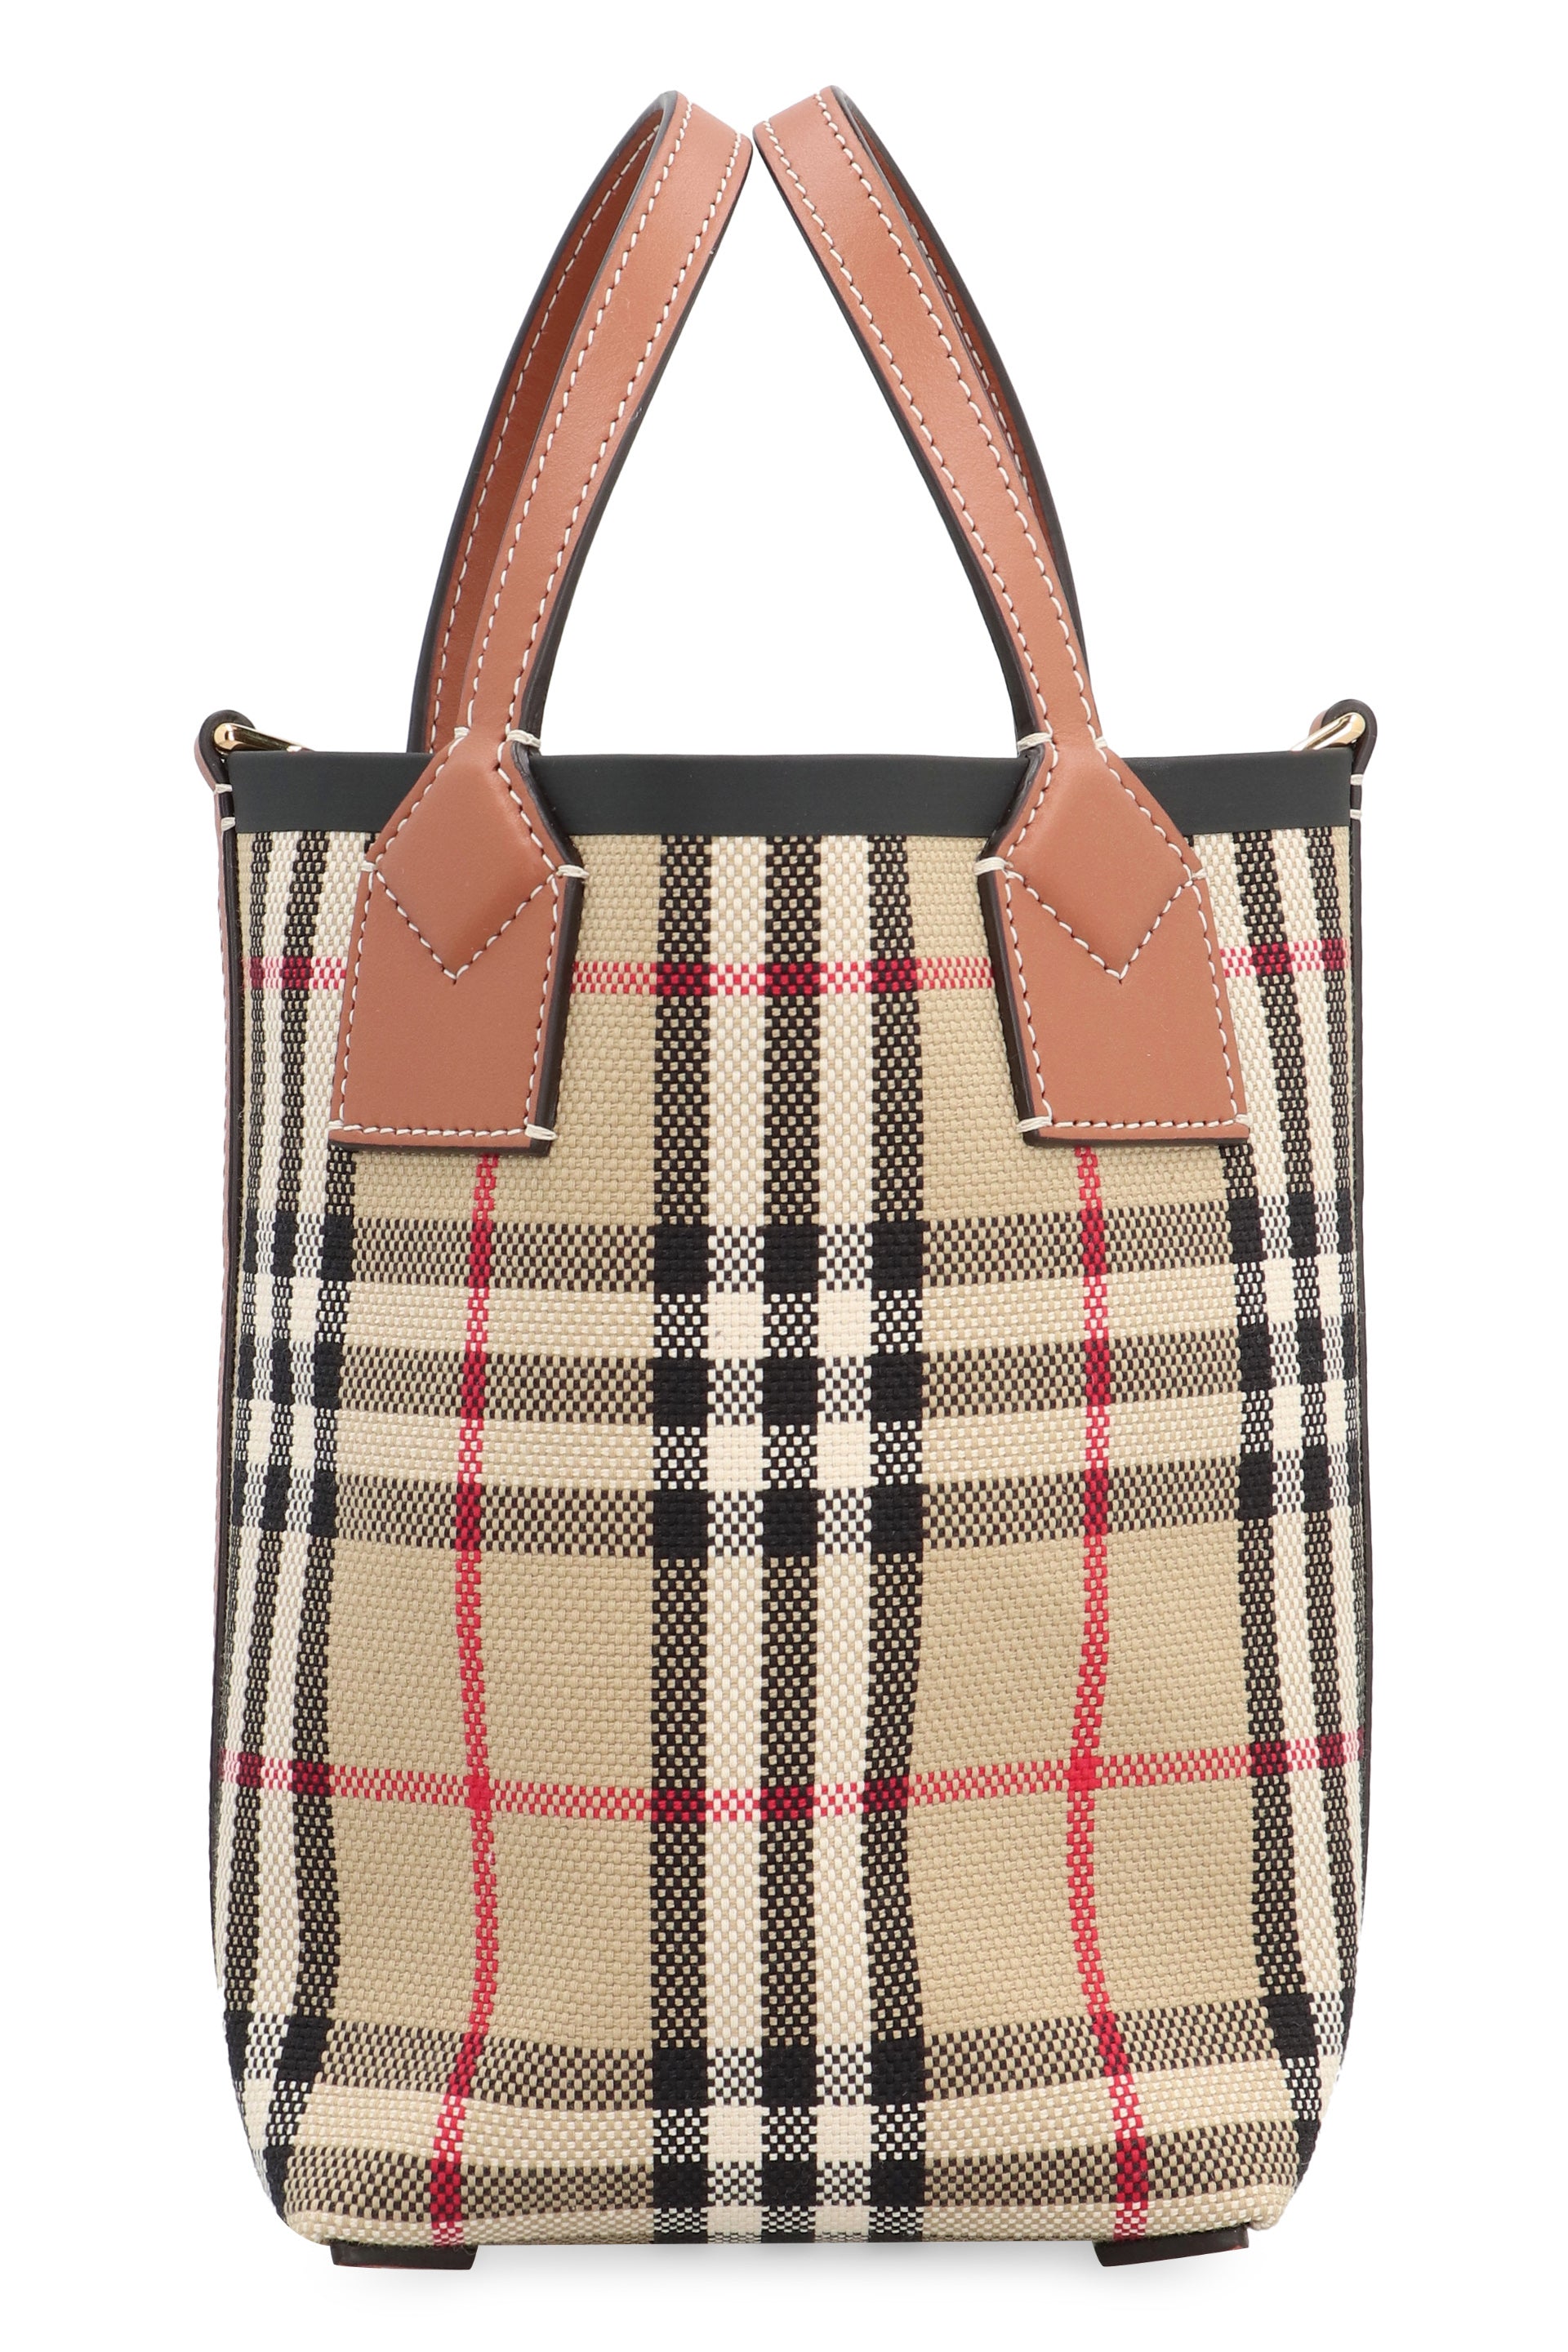 Shop Burberry Small Vintage Check Tote Handbag With Leather Handles And Removable Strap In Beige